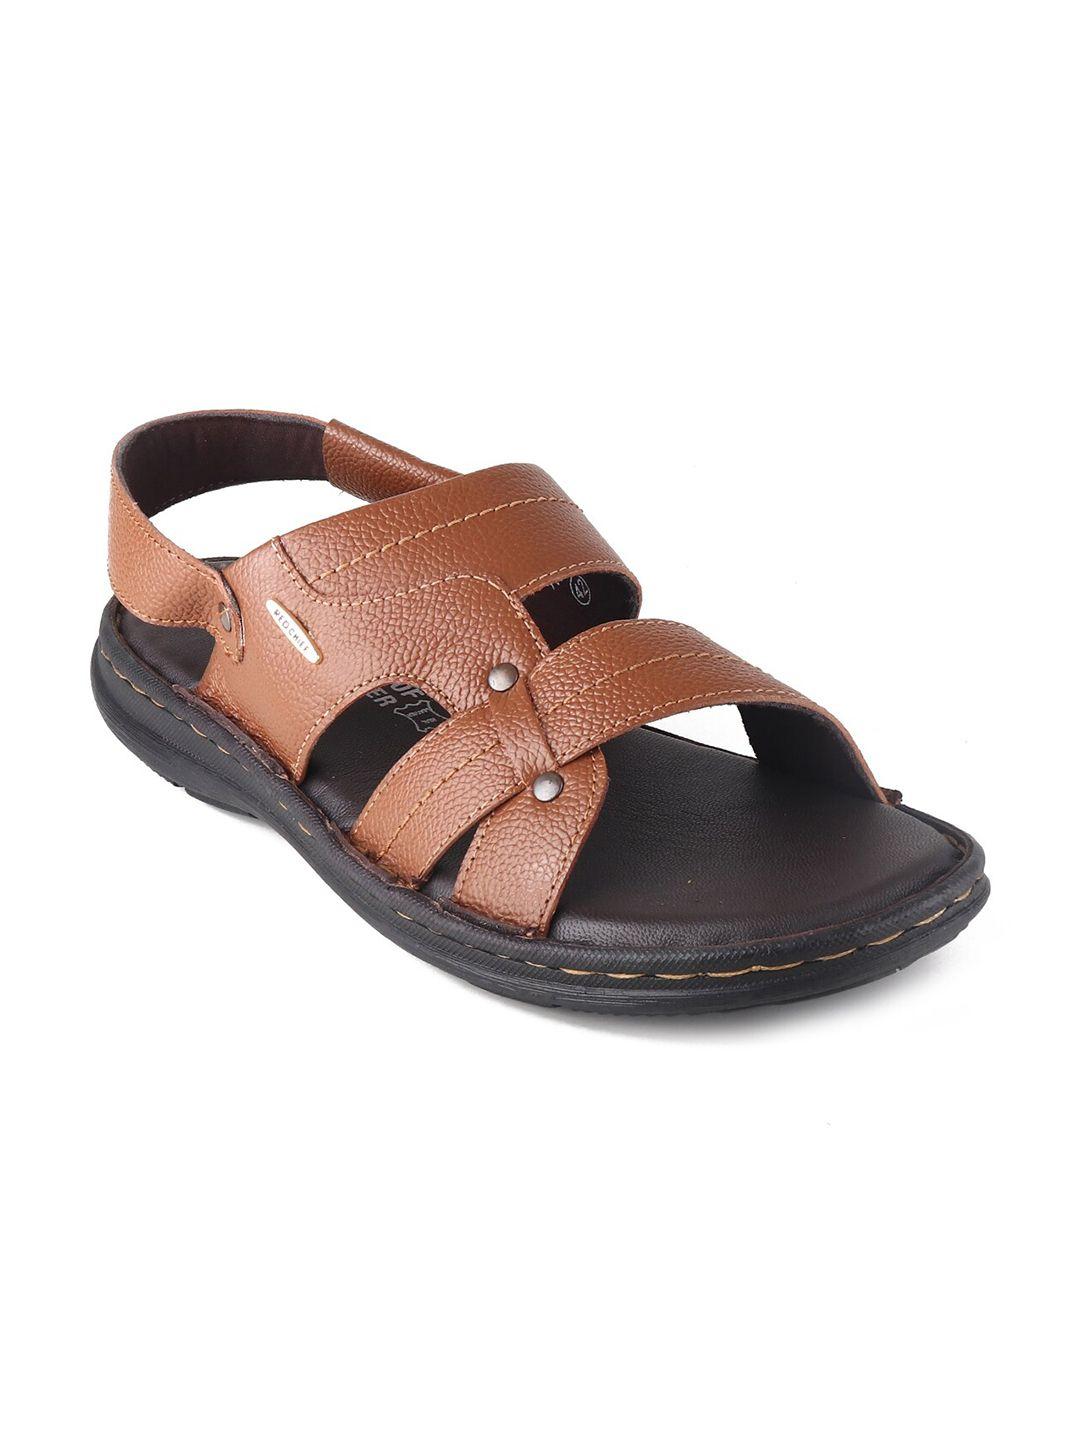 red chief men tan & black leather comfort sandals